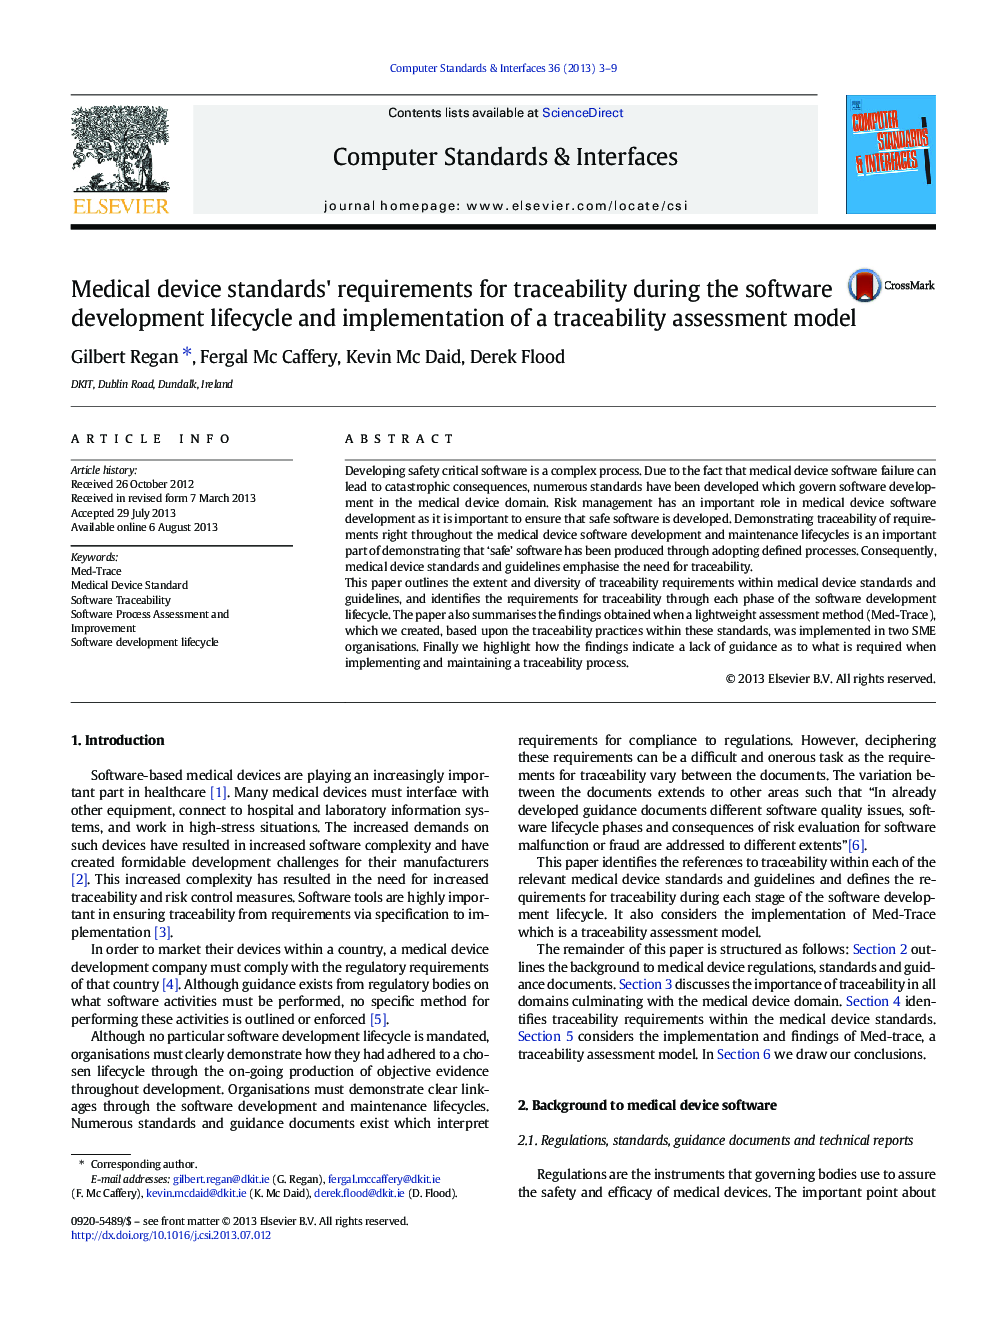 Medical device standards' requirements for traceability during the software development lifecycle and implementation of a traceability assessment model